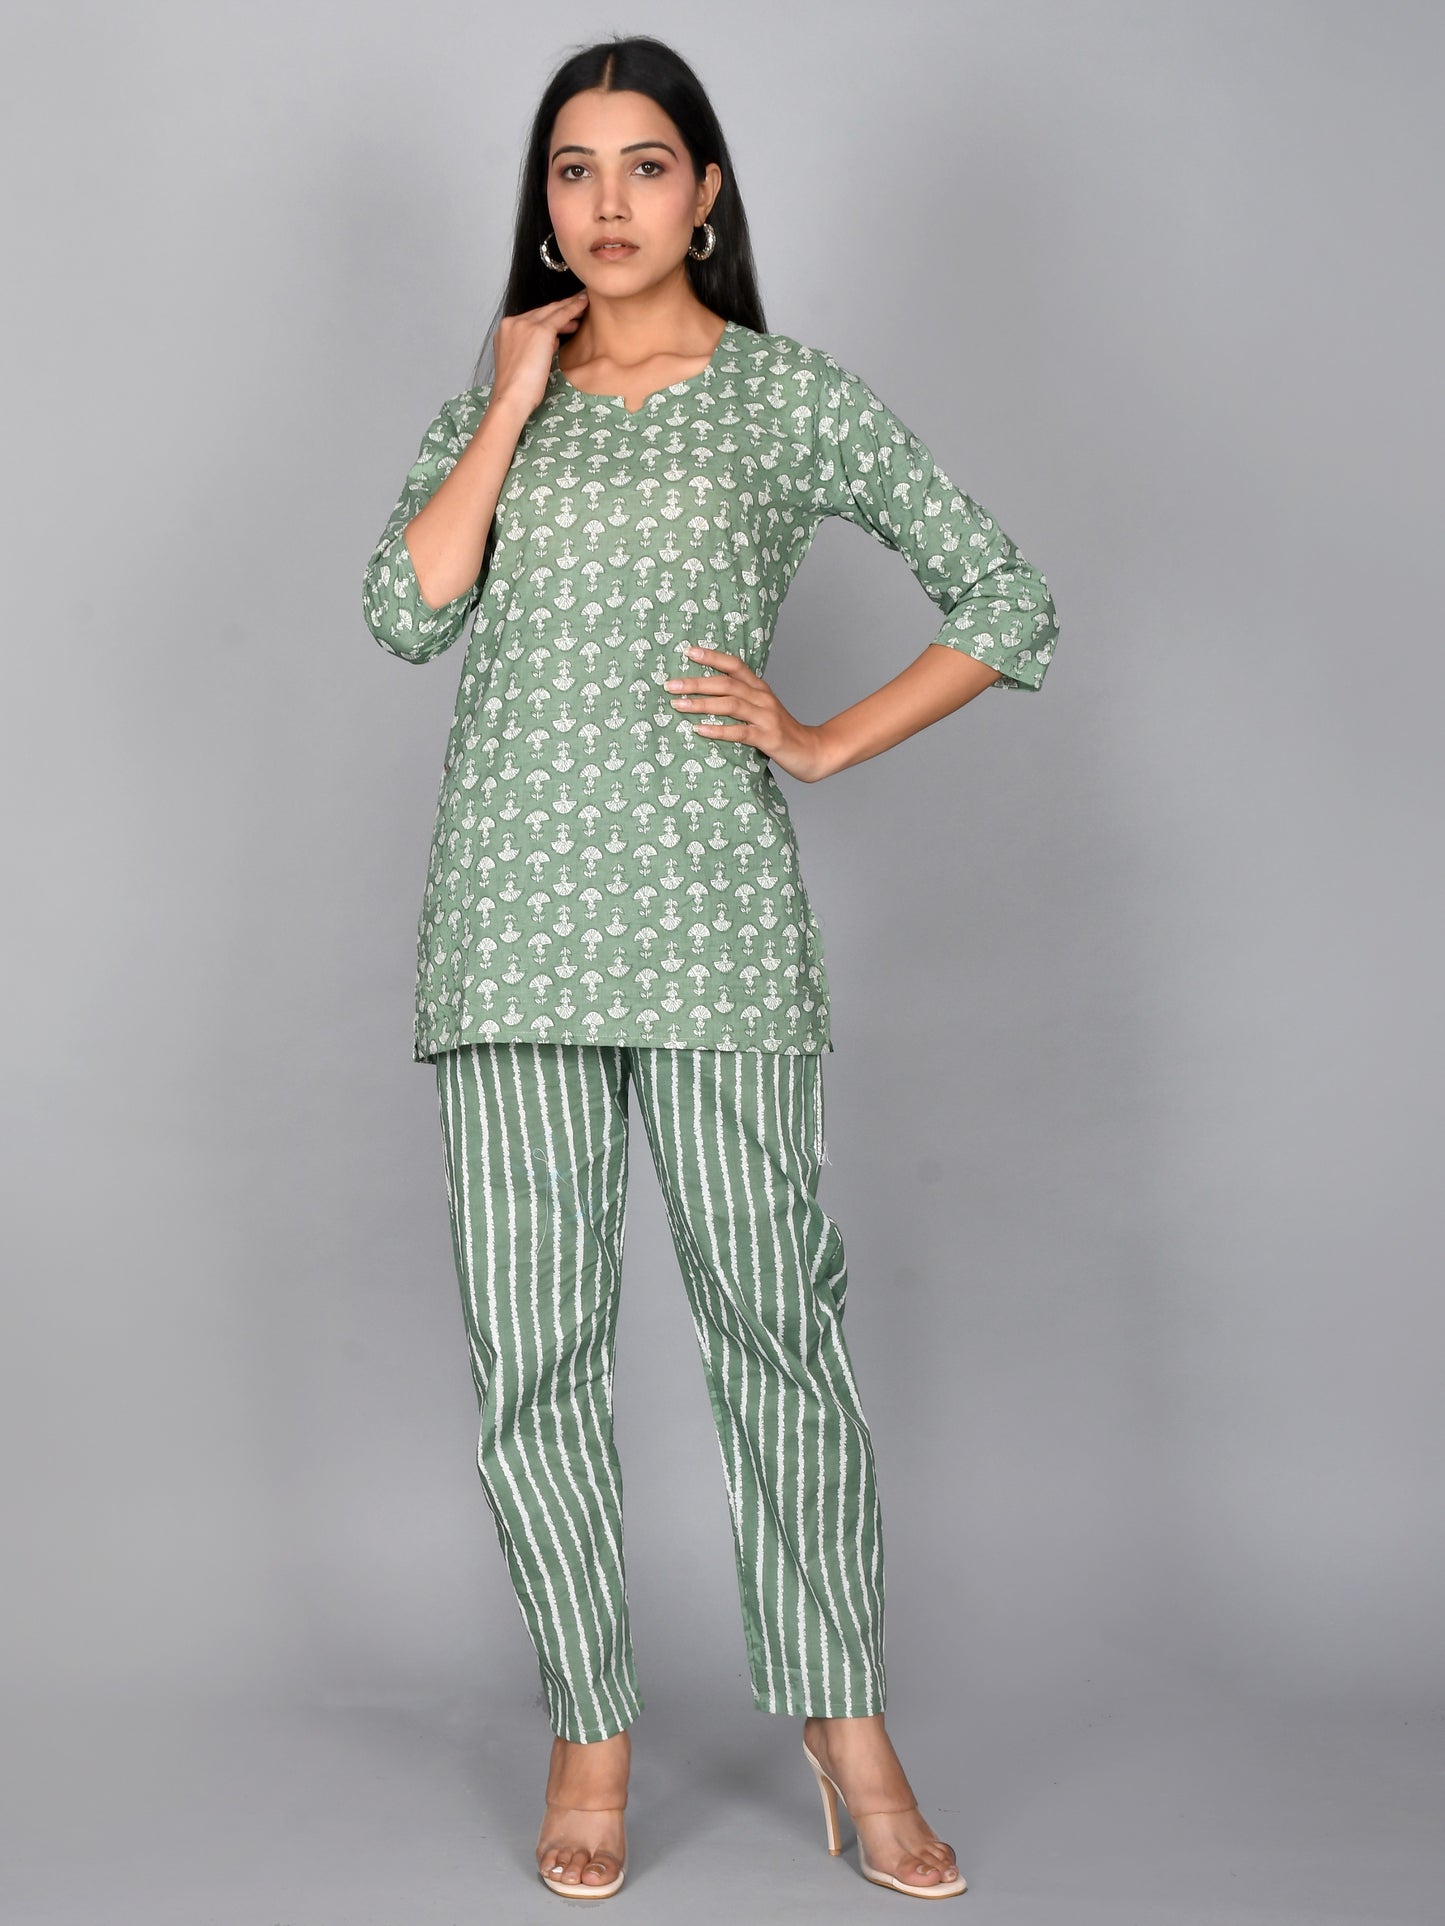 Shop This night suit is designed for both comfort and style. Made with pure cotton, it provides softness and breathability. The beautiful floral print adds a touch of elegance. Perfect for women and girls, this night suit offers a comfortable and stylish sleepwear option.